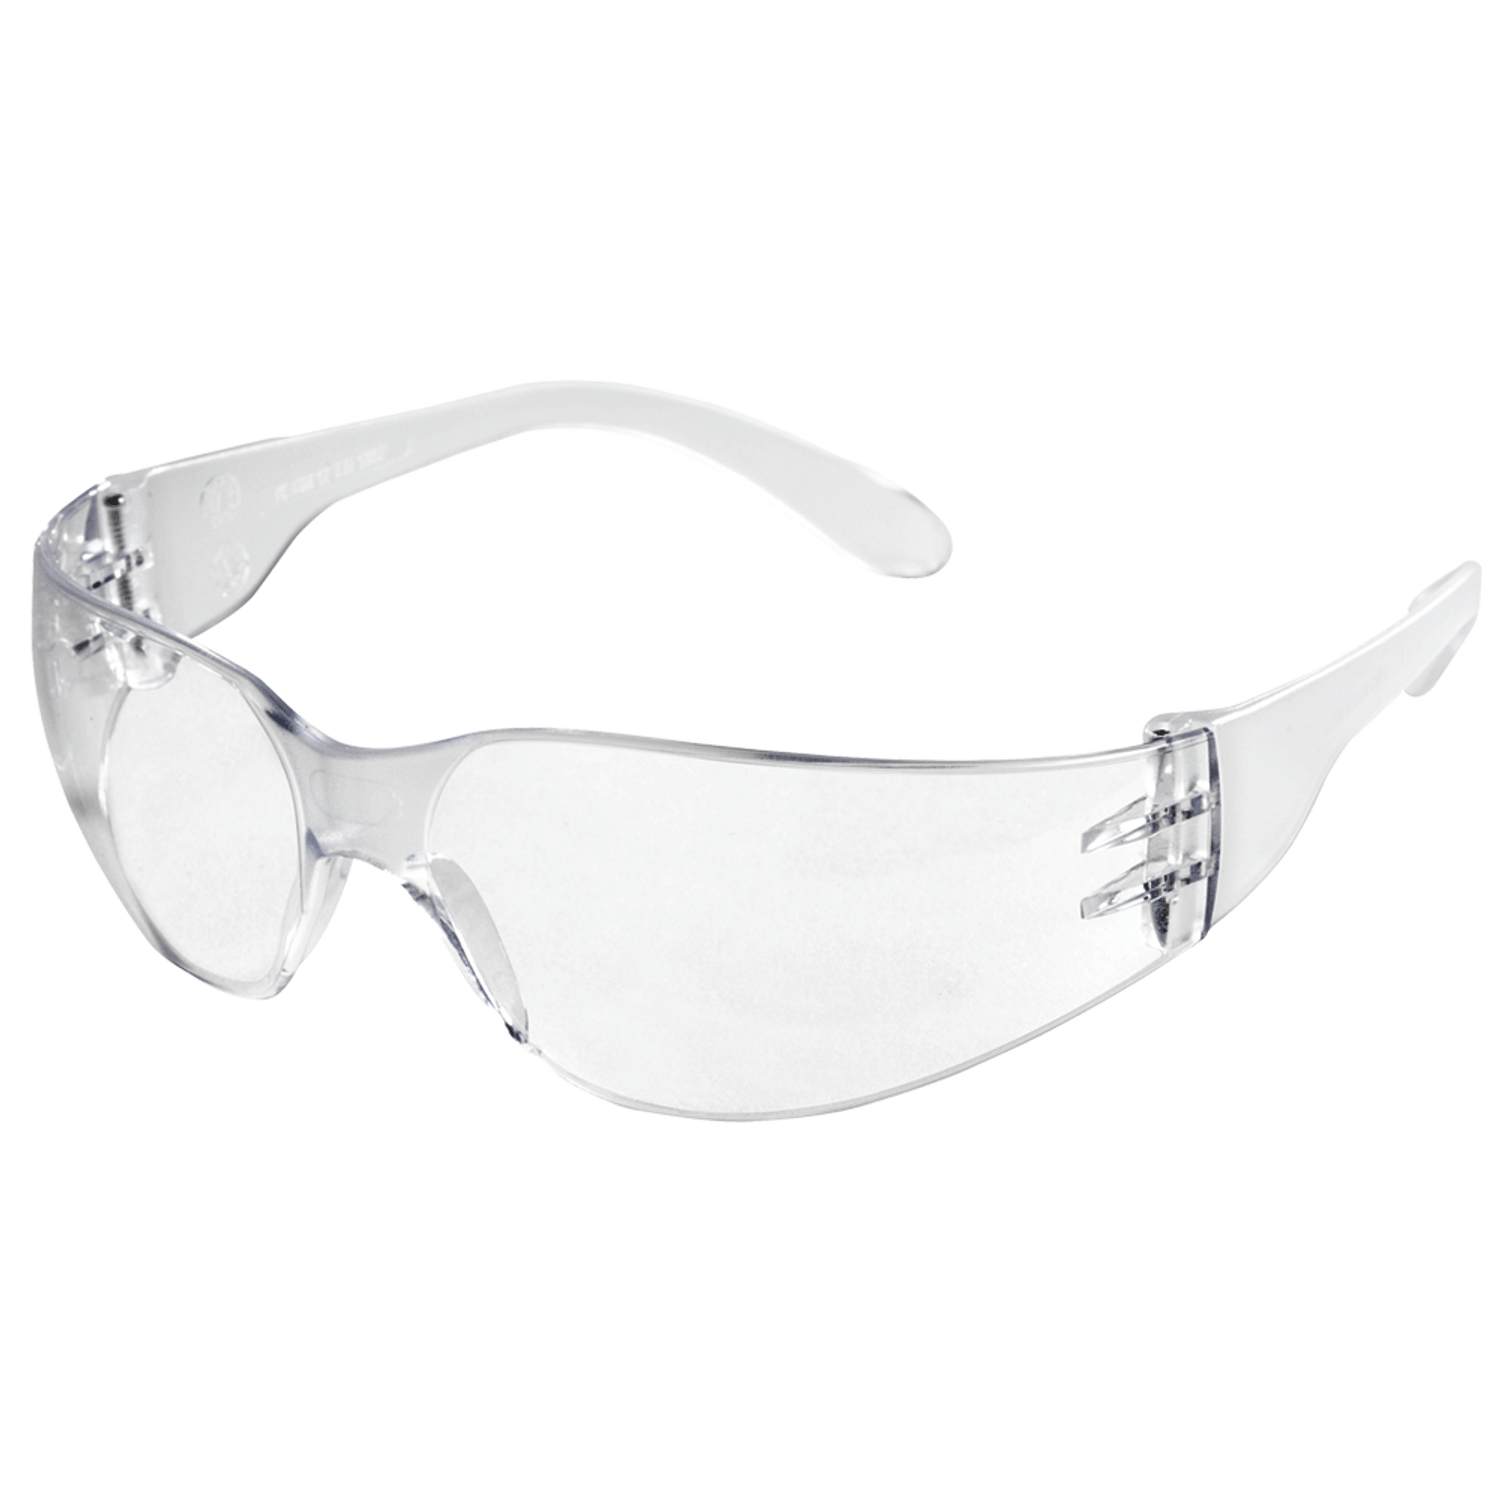 Sellstorm X300 Safety Glasses - Clear Tint (12 Pack) 